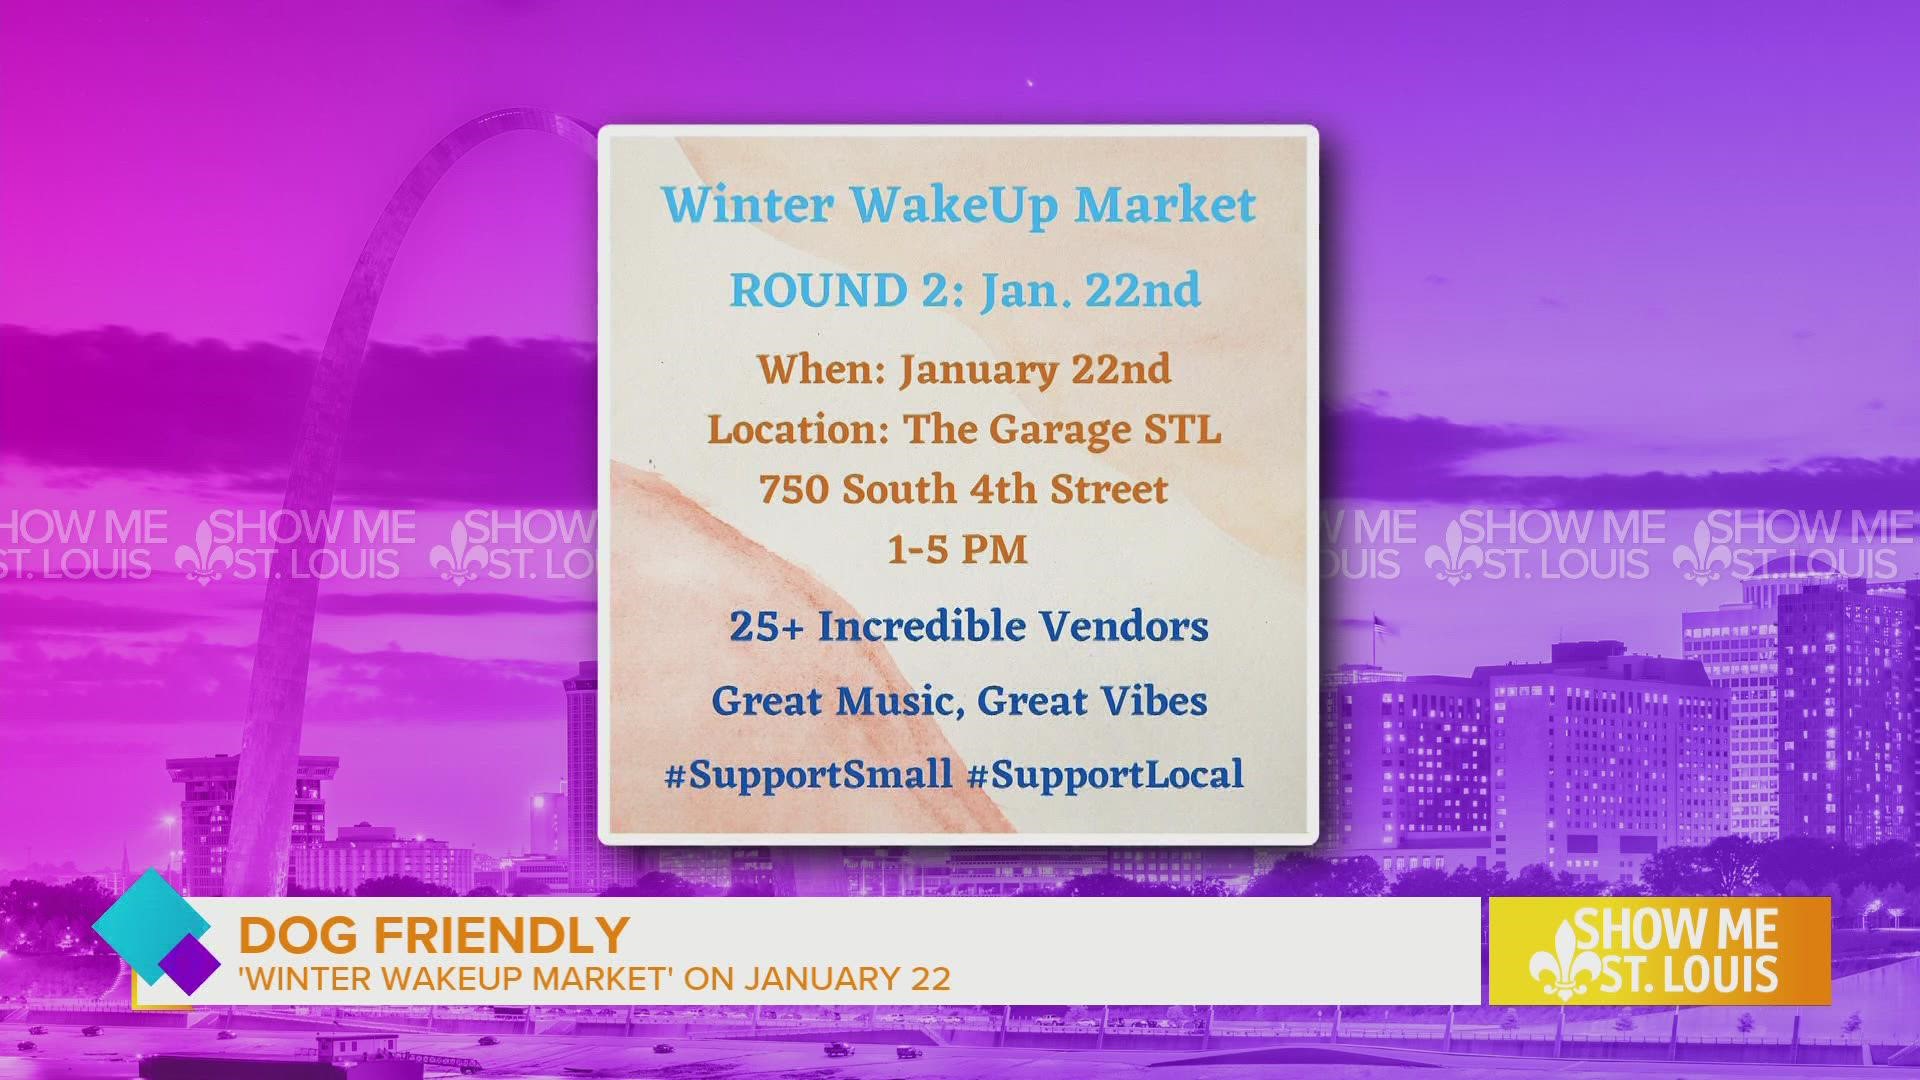 Bark n Sniff’s Winter WakeUp Market Series, with The Garage STL, helps the best small businesses in Saint Louis thrive during the hardest time of the year.